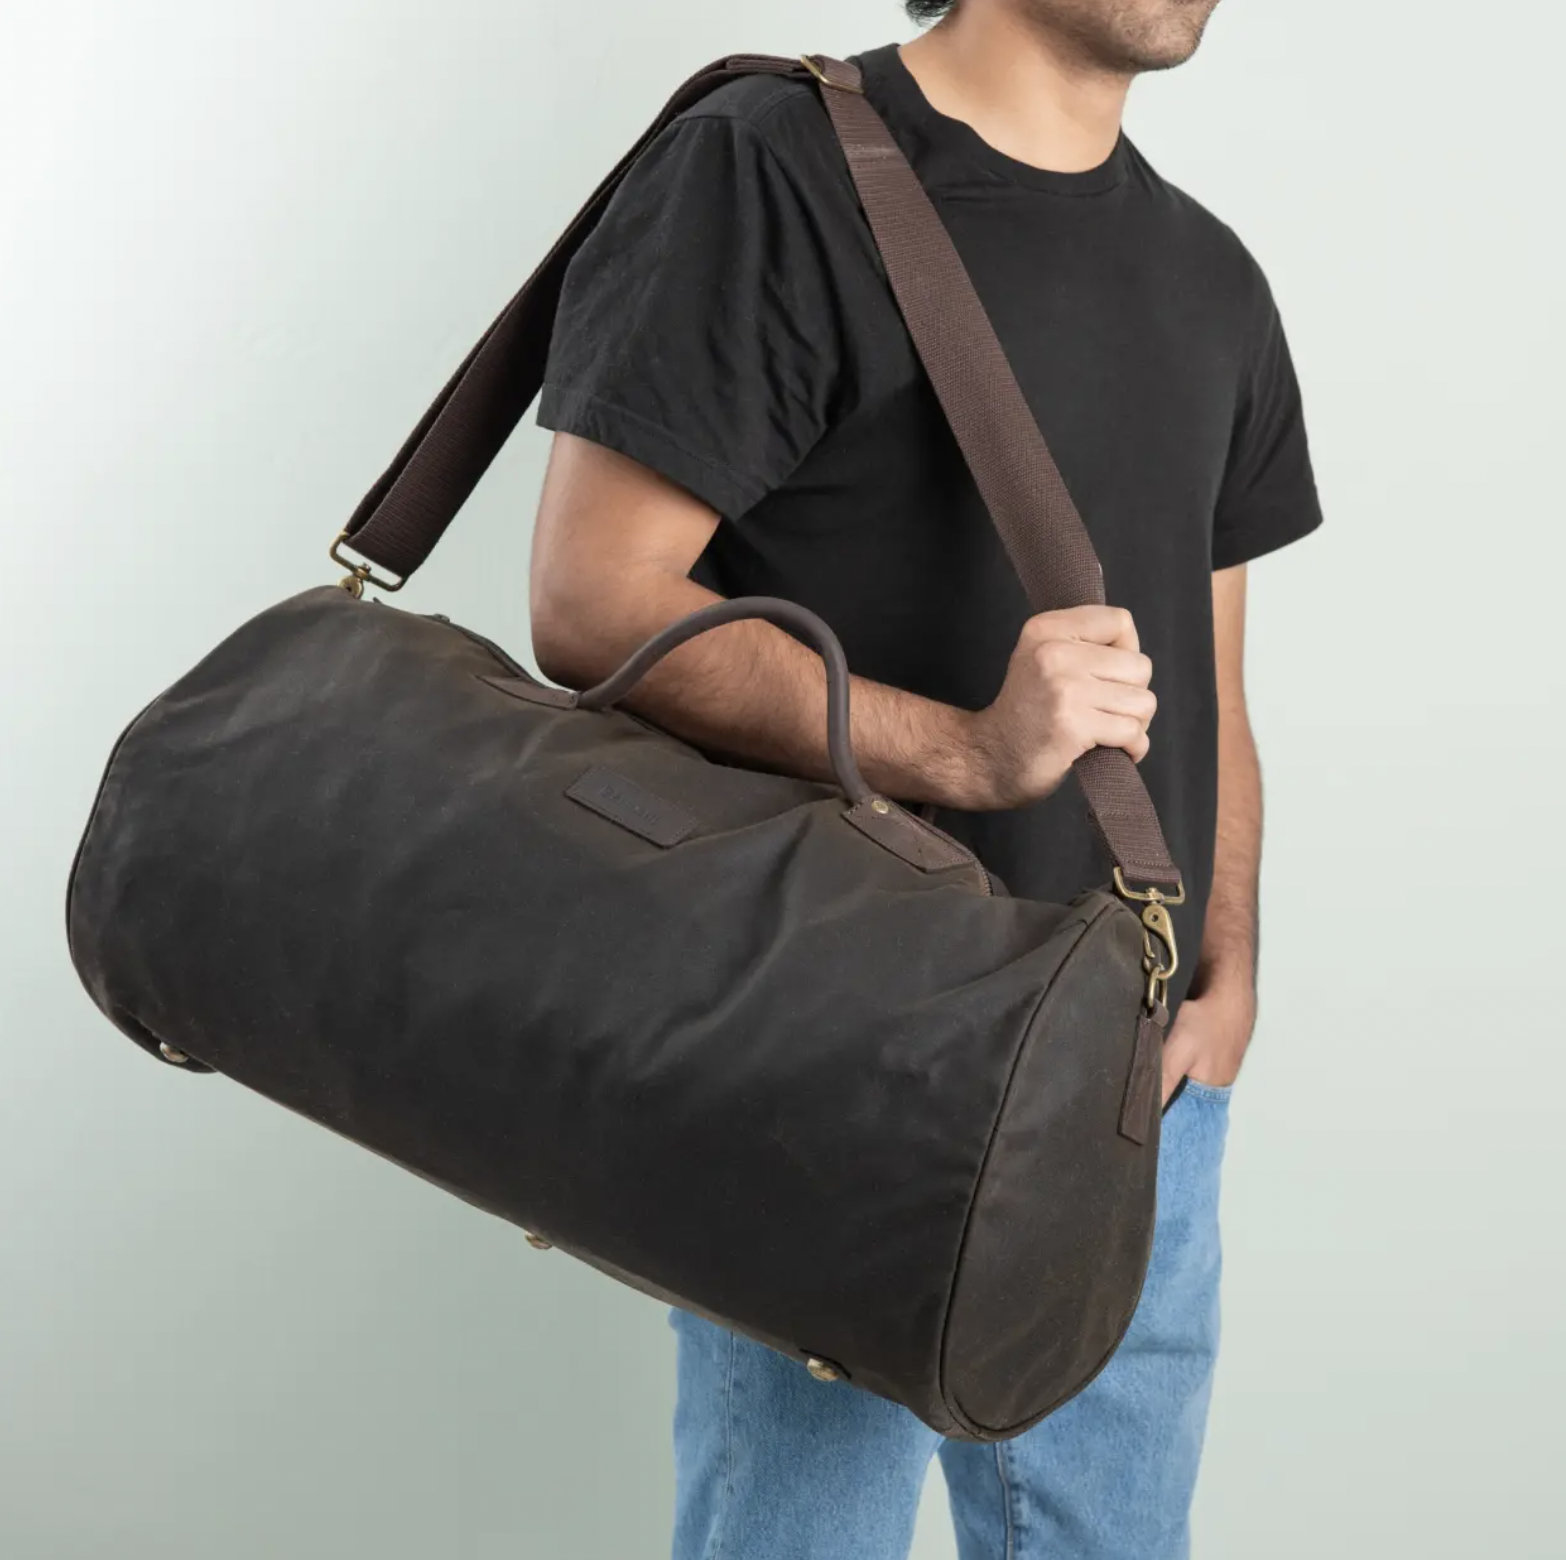 Need a New Duffel? Get This One From Barbour at a Discount.